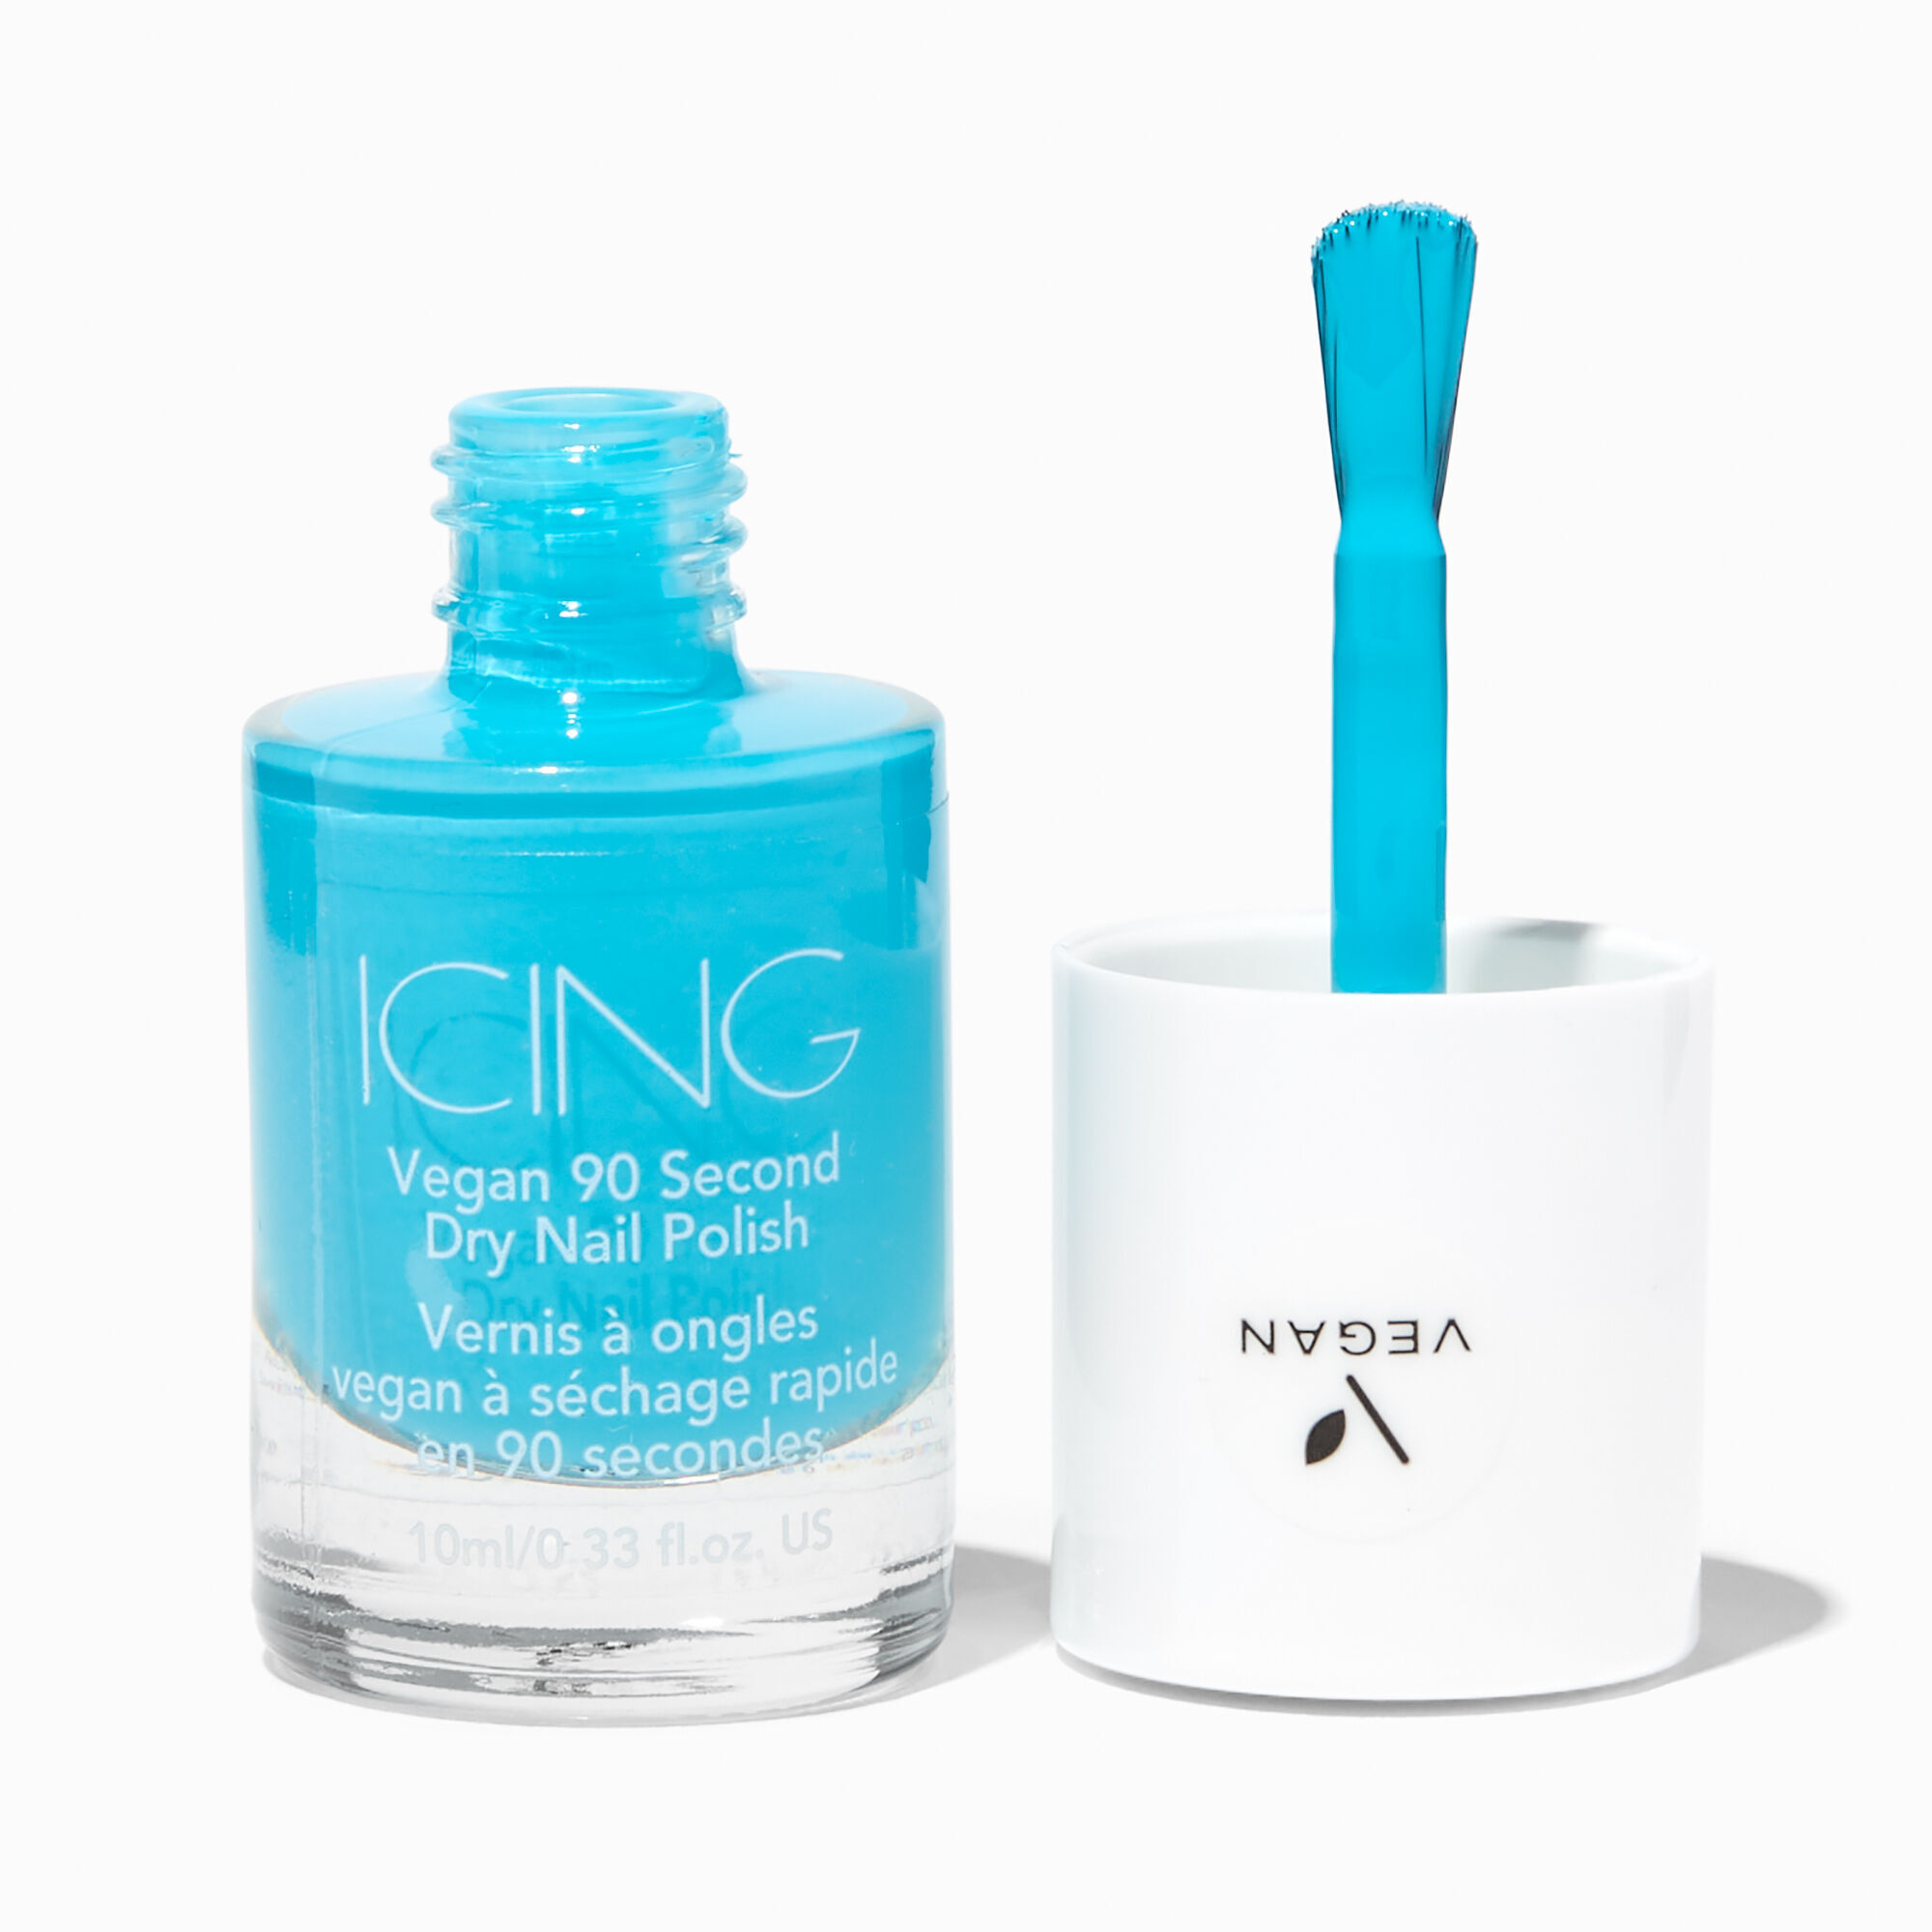 View Claires Vegan 90 Second Dry Nail Polish Meditate information